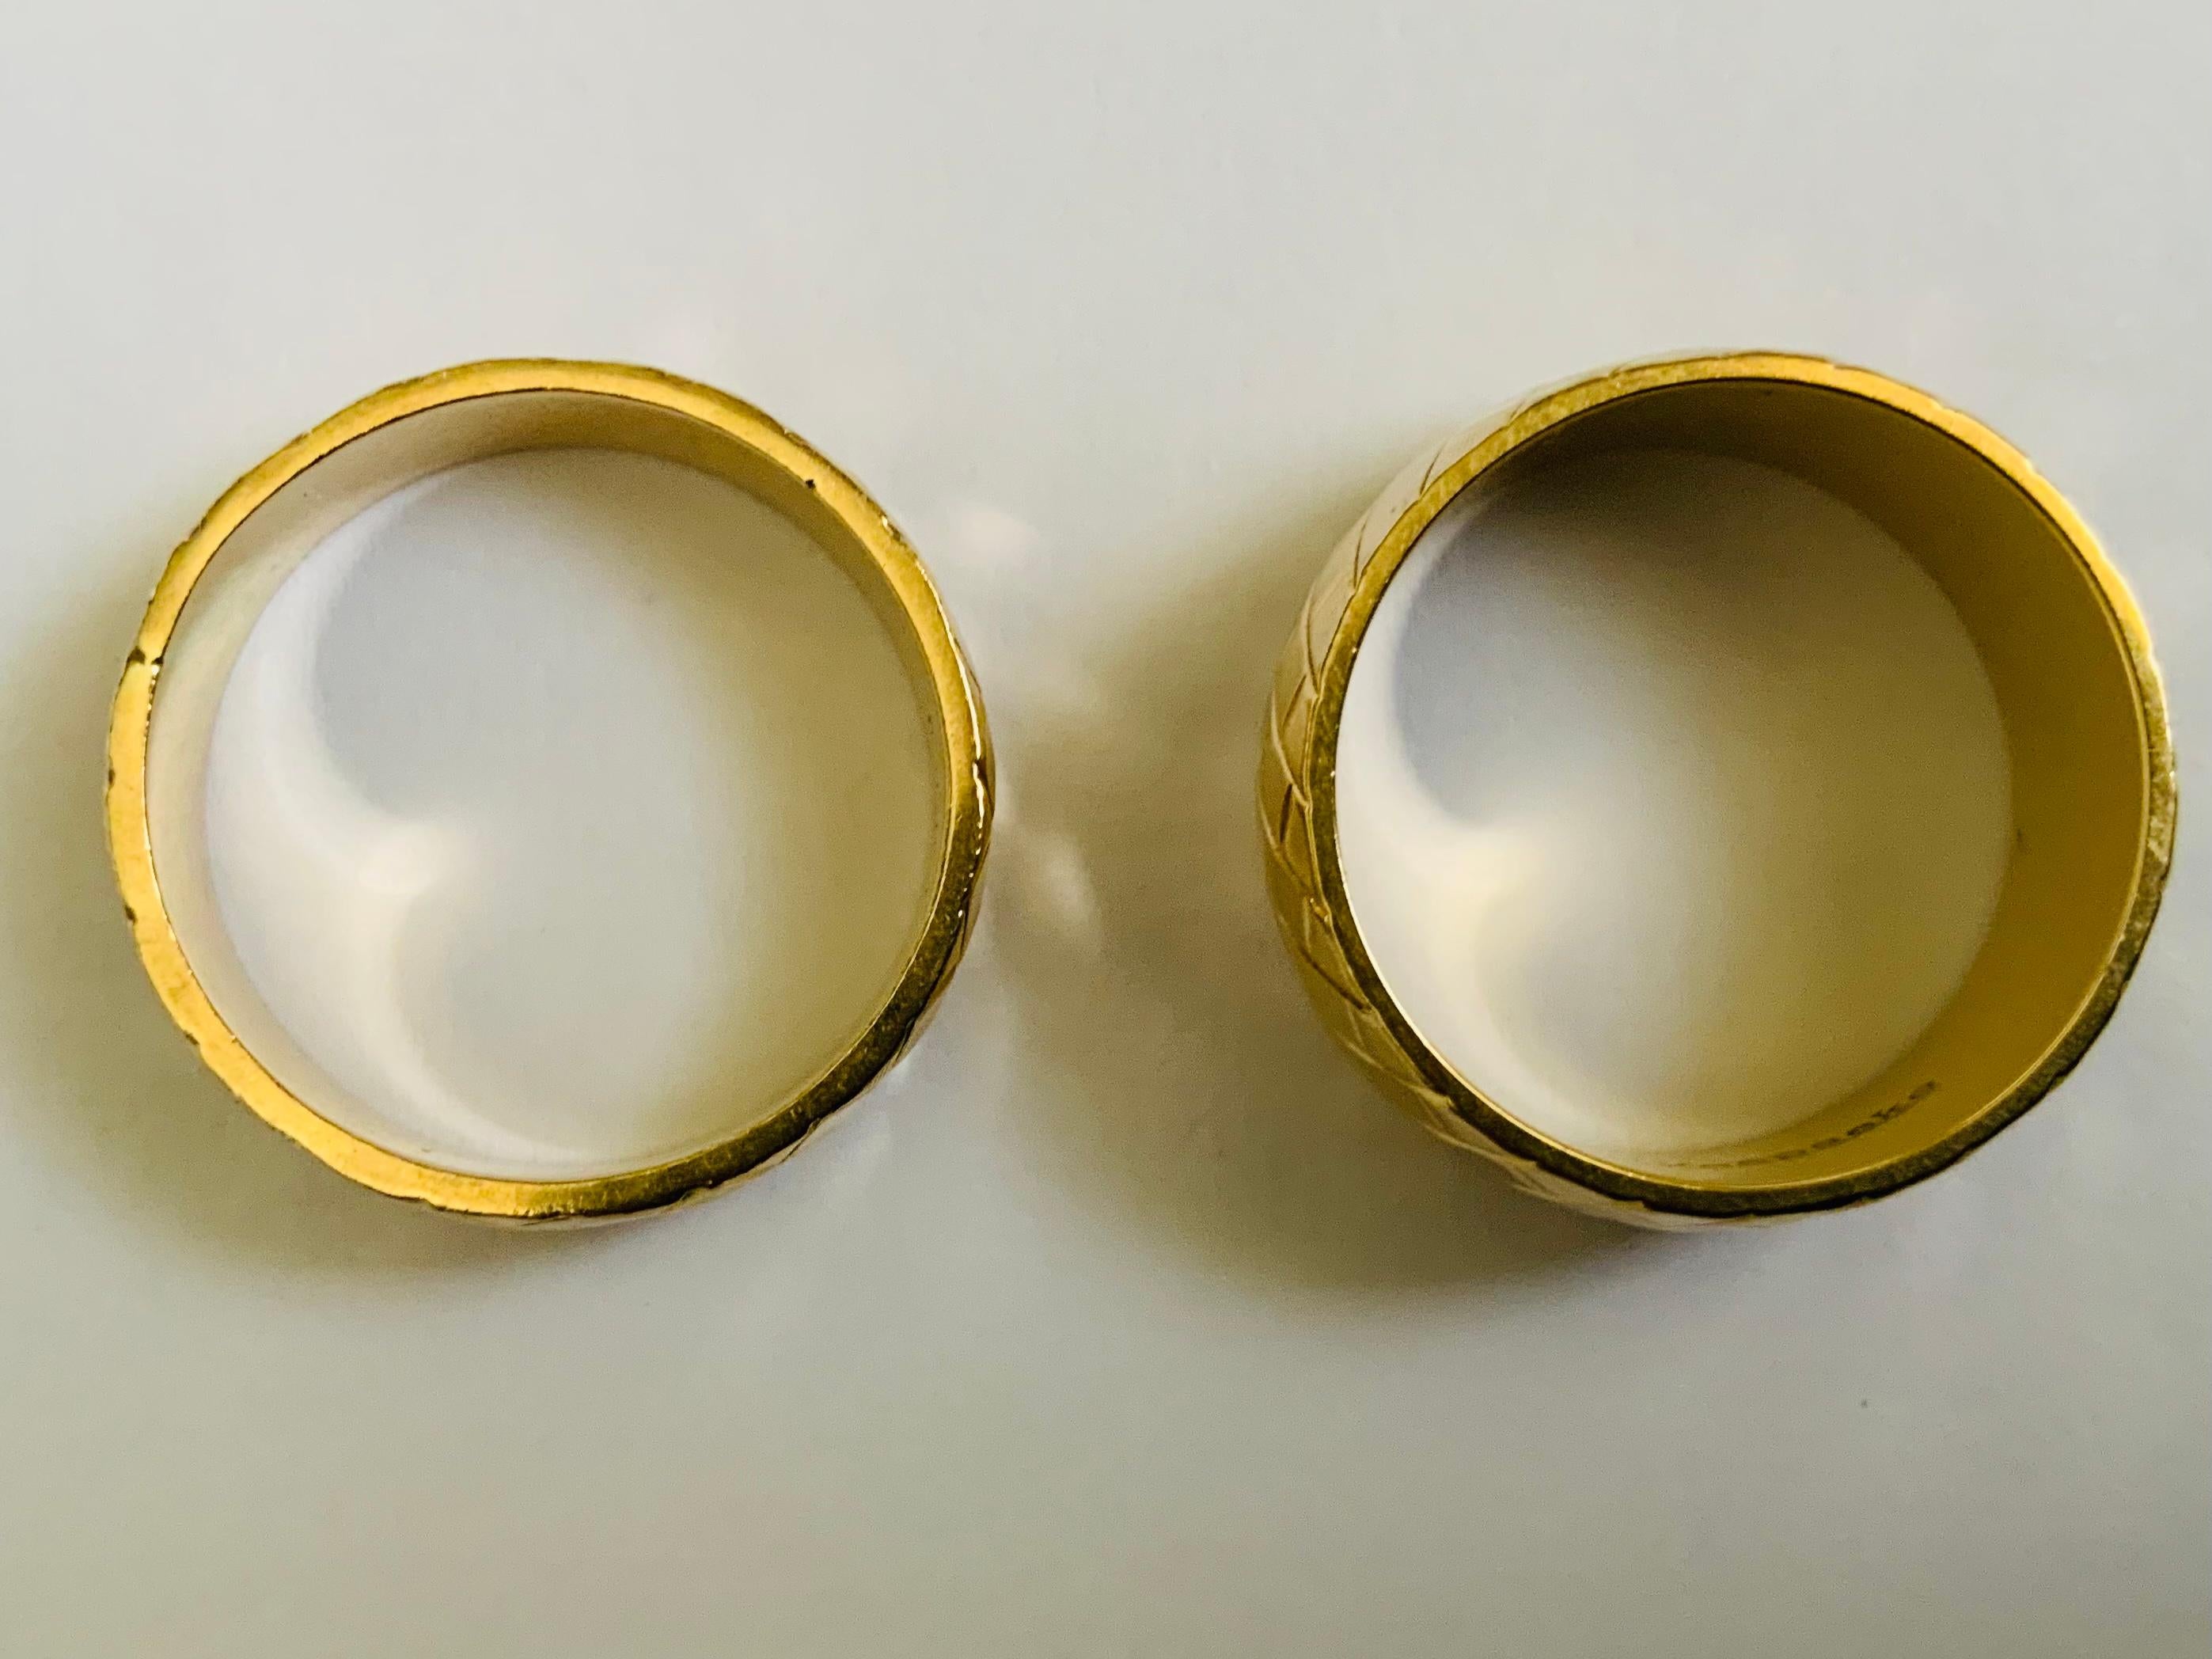 This is a Set of 14K Yellow Gold Wedding Rings. It depicts two ribbed bands rings, one is wider ( 8.2mm ) than the other one (5.76 mm ). The rings are hallmarked 14K Keepsake. Their weights are 6.7 and 4.8 grams and their sizes are 6.5 and 6.75,